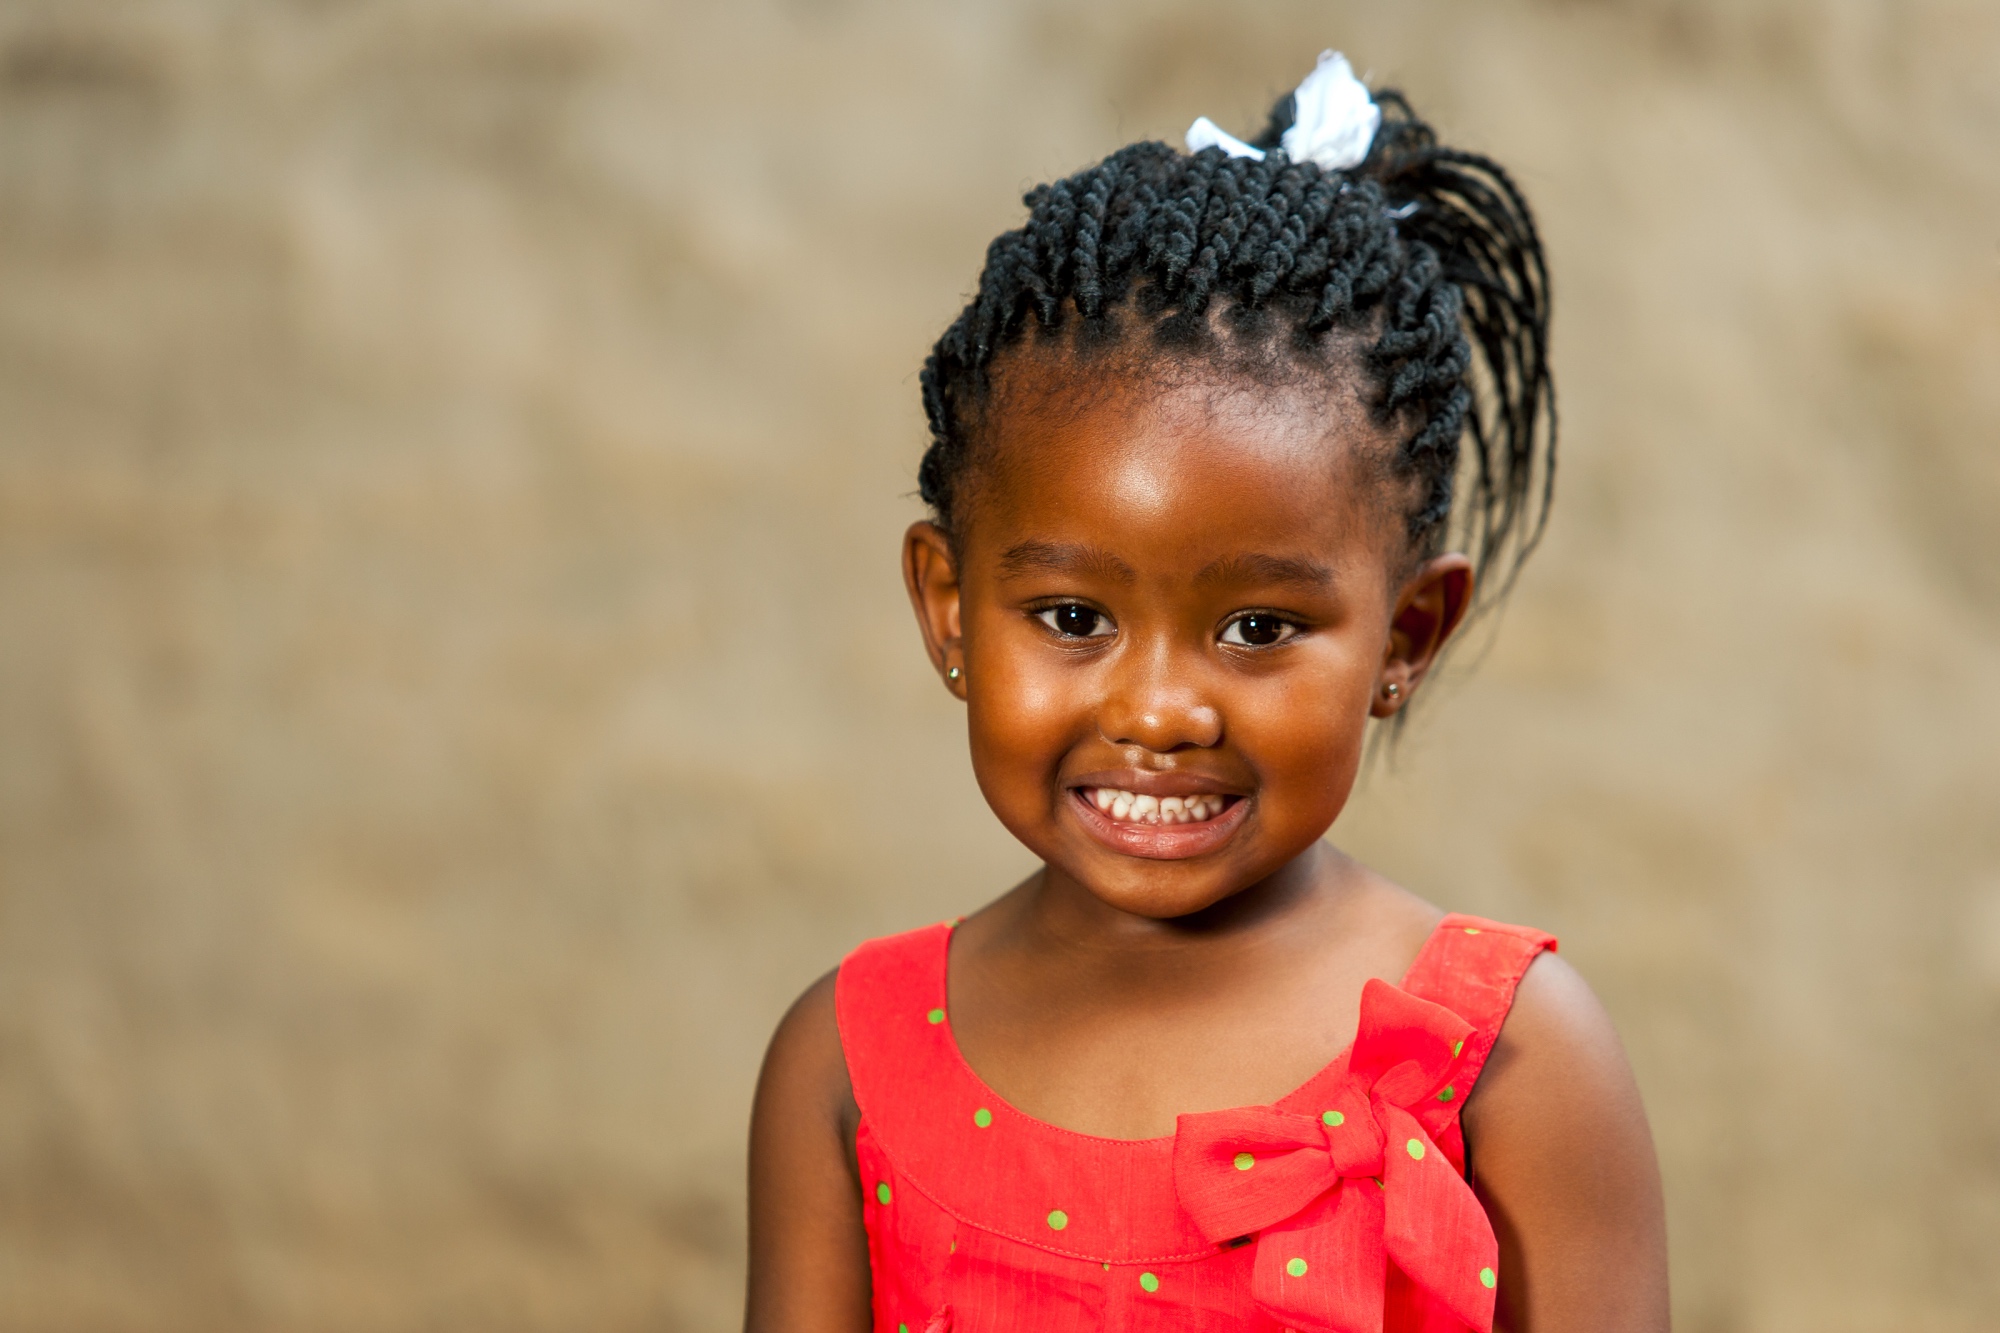 Little African Girl With Braided Hairstyle.